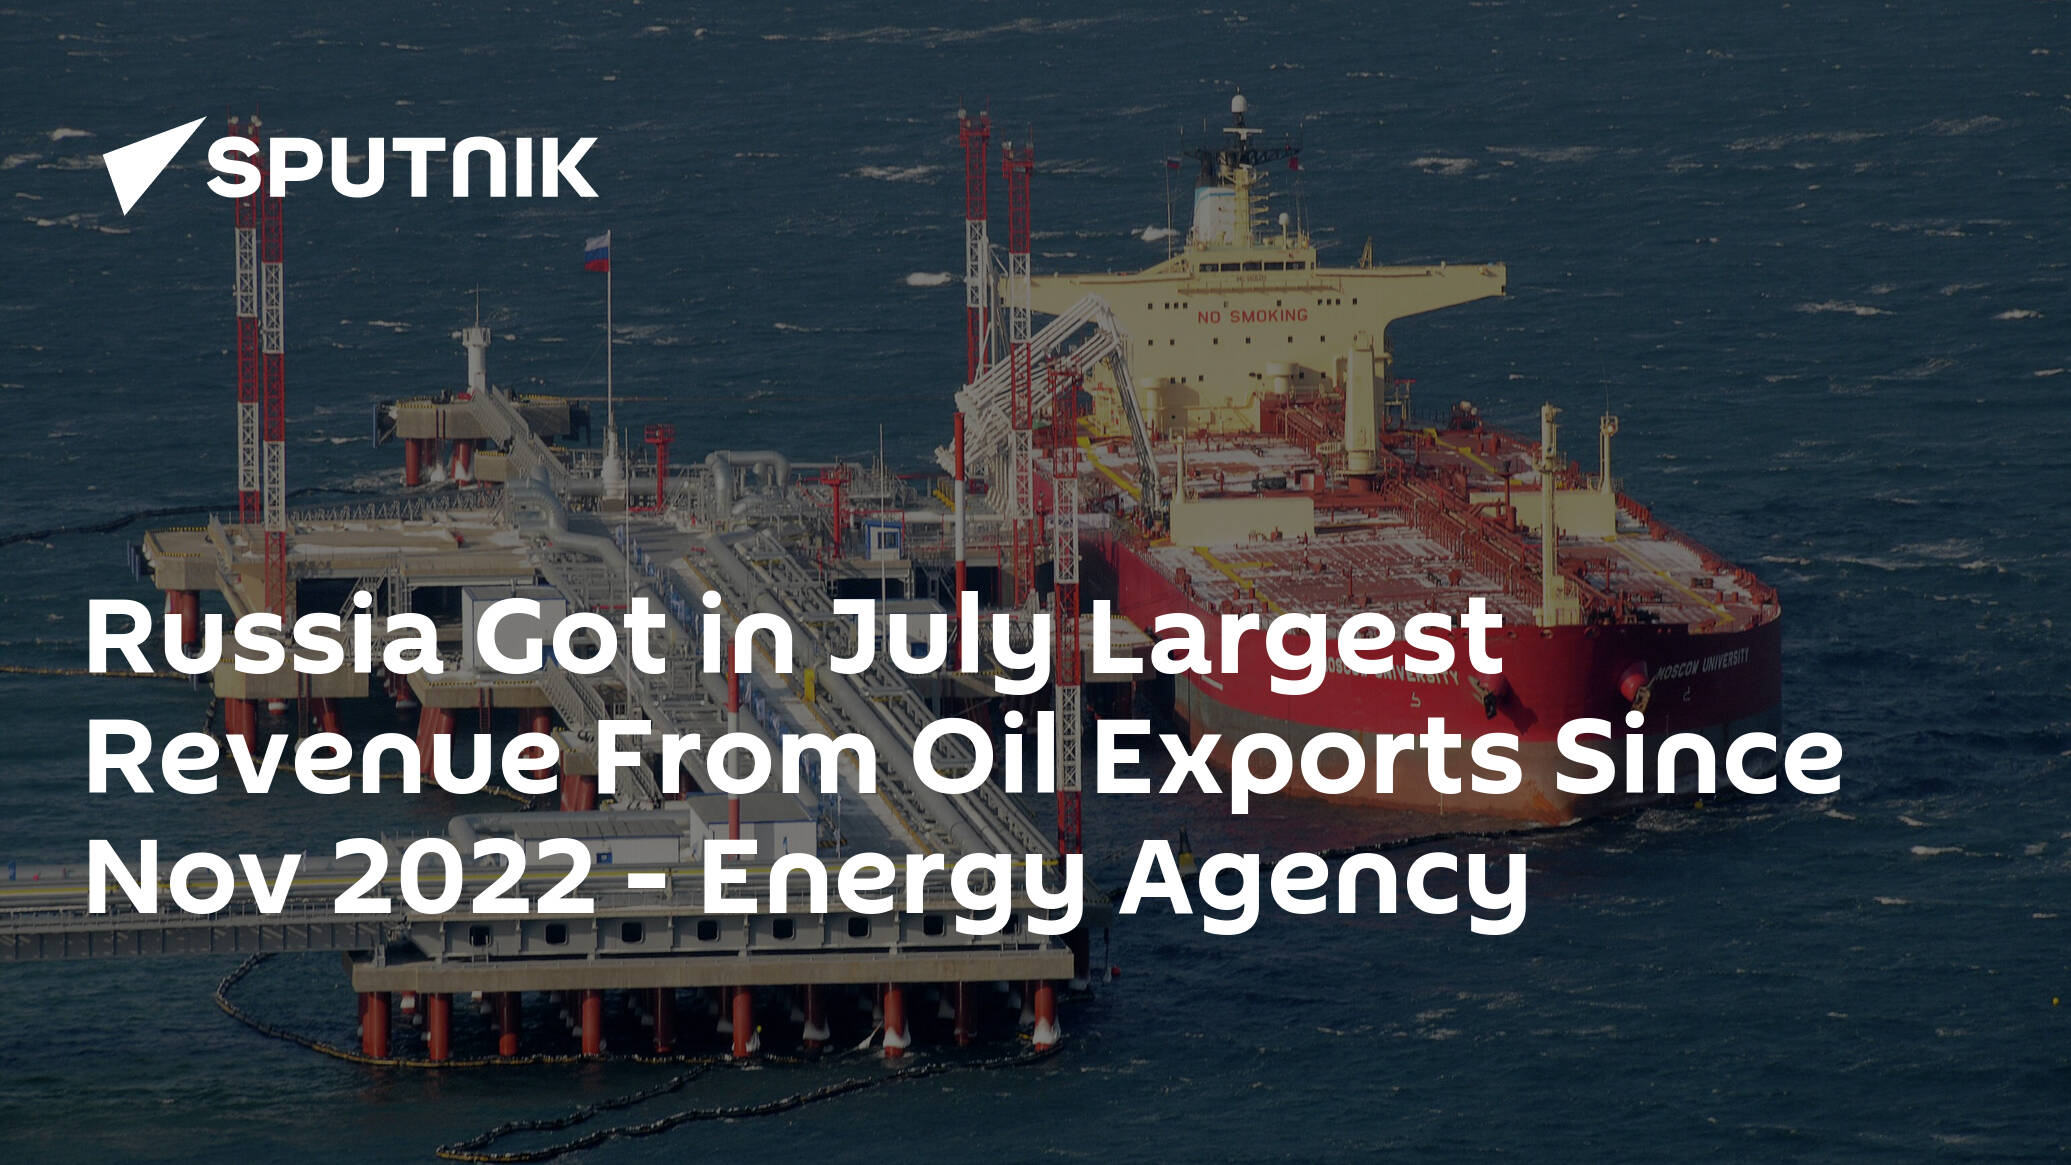 IEA Believes Russia Got in July Largest Revenue From Oil Exports Since Nov 2022 – Report